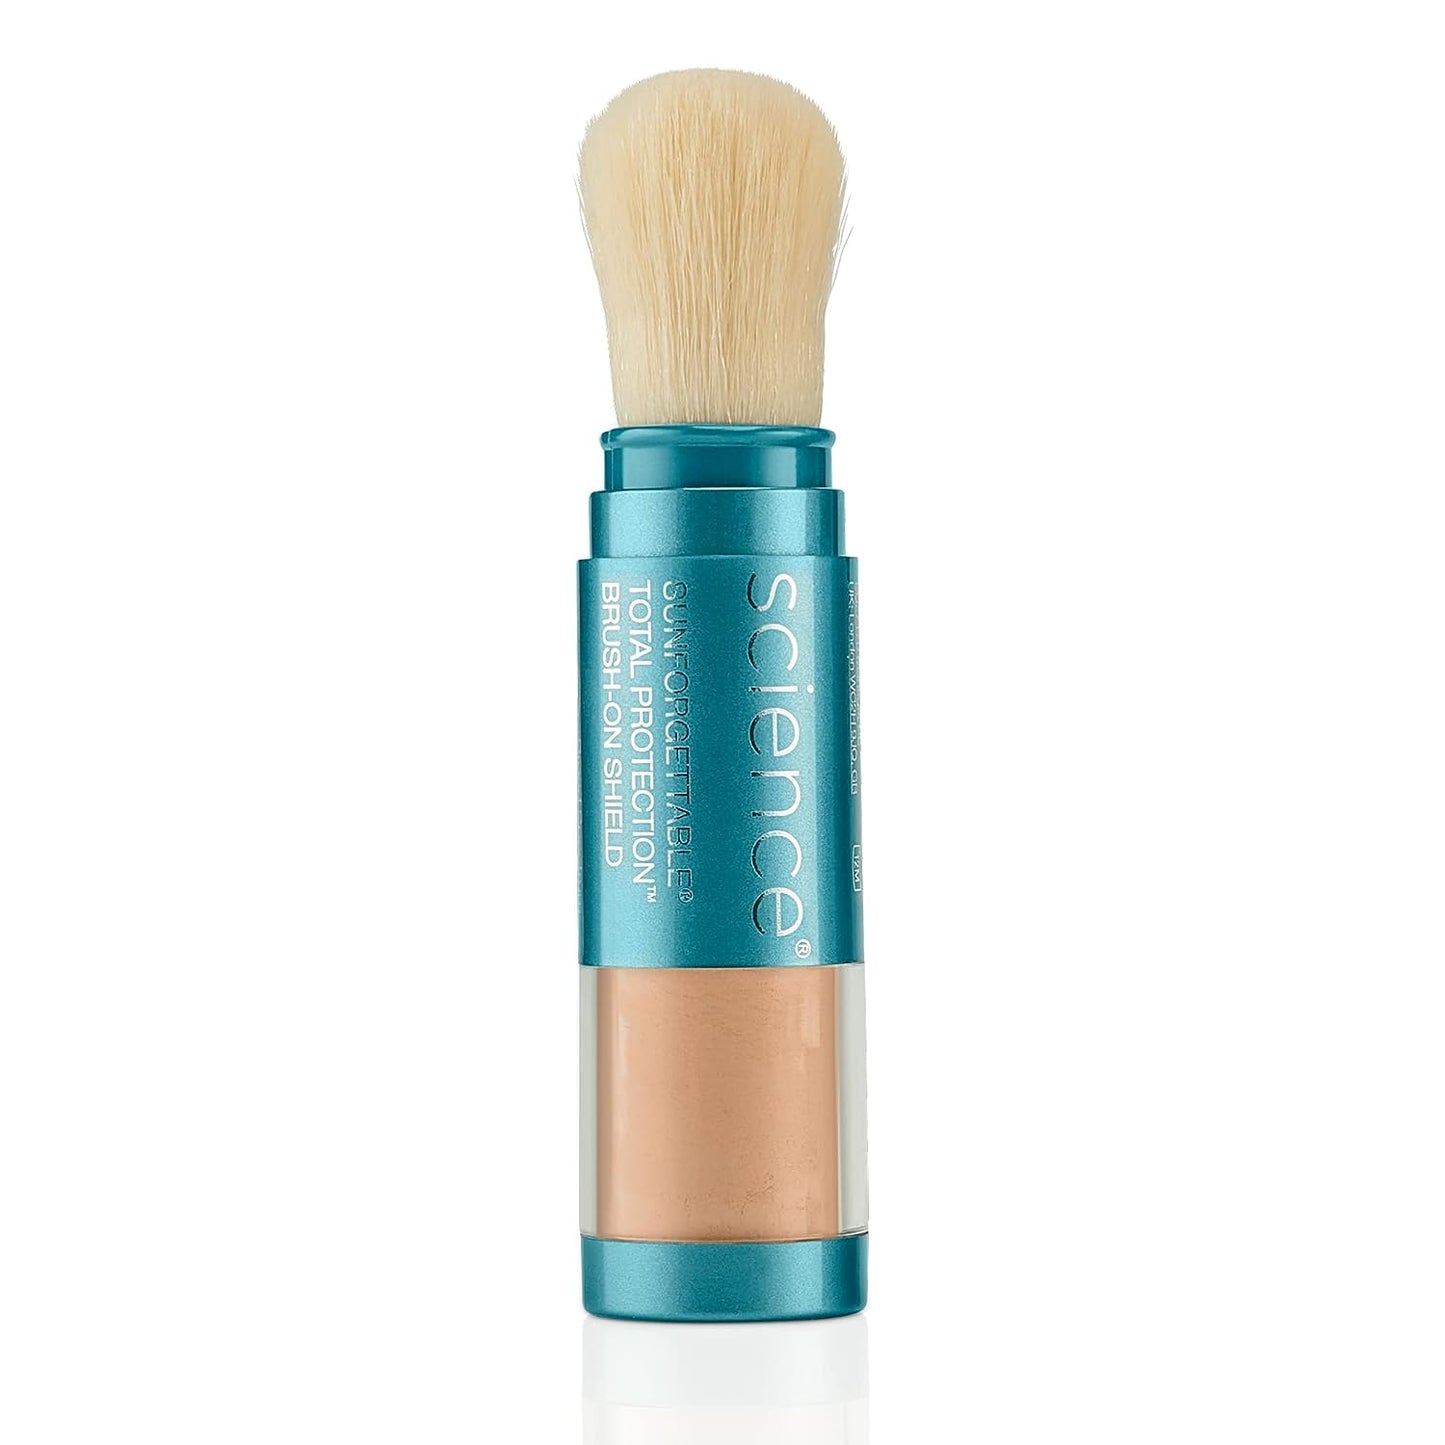 Colorescience Sunforgettable® Total Protection™ Brush-On Shield SPF 50 in Medium